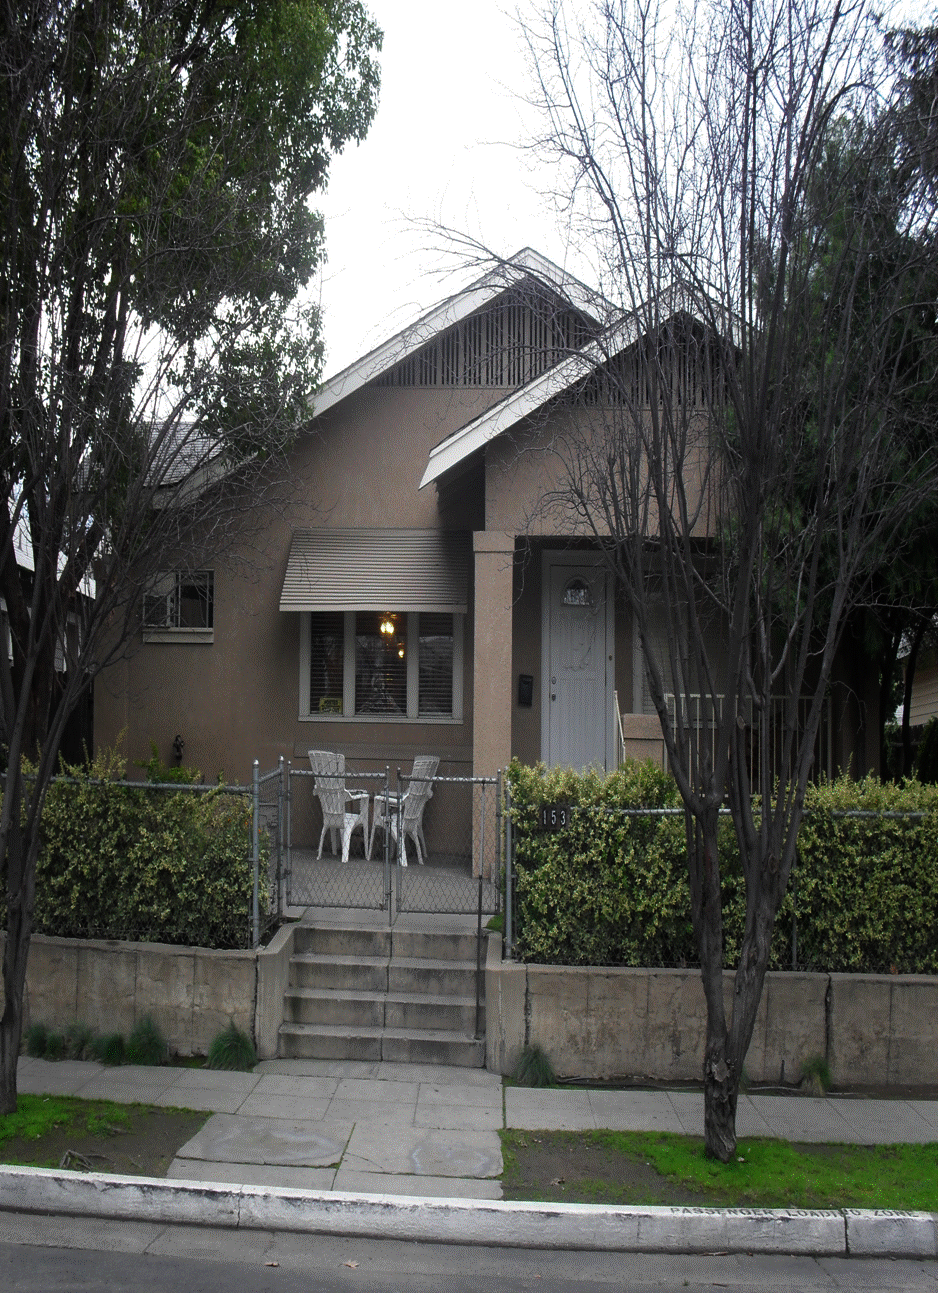 Curb Side view of Fresno Bridge house with chairs on patio